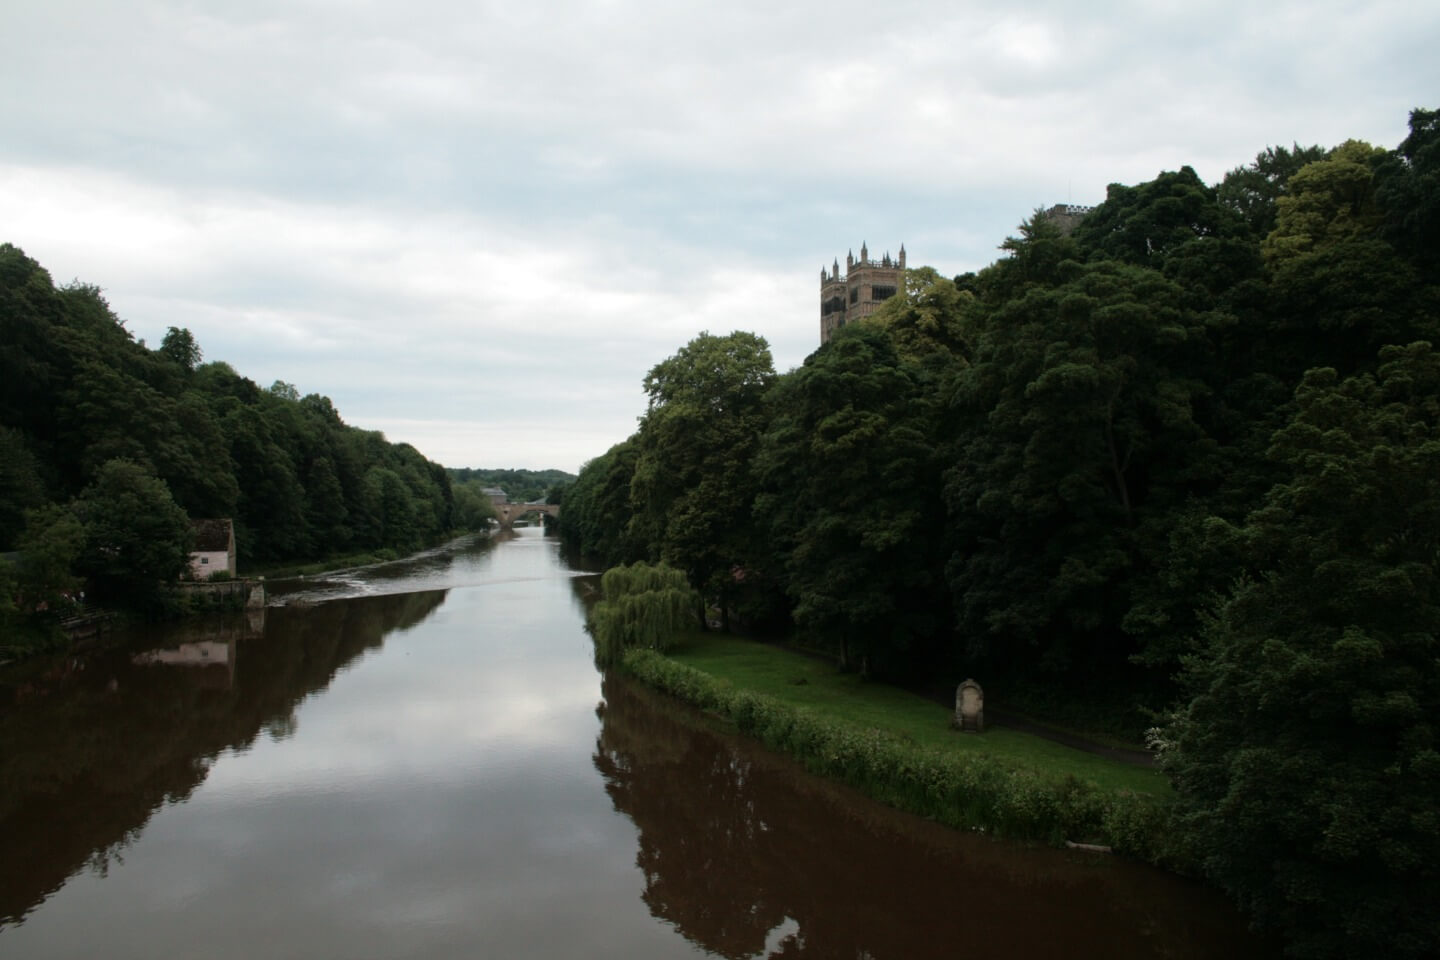 Student Accommodation in Gilesgate, Durham - view of the River Wear on a cloudy day